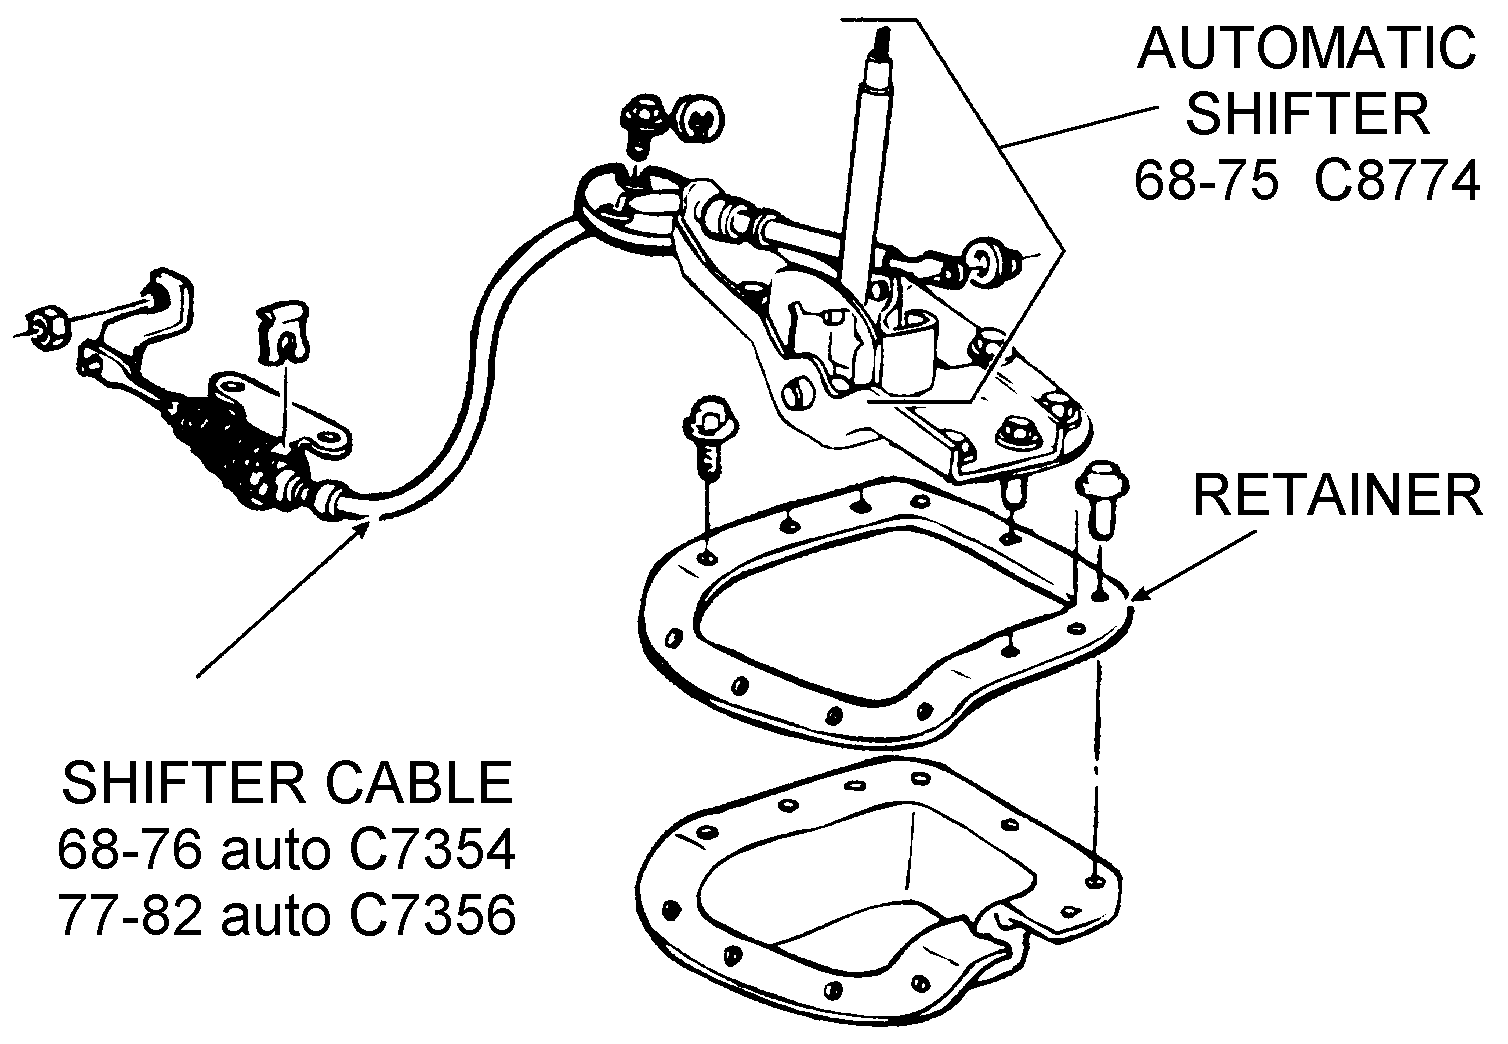 Automatic Shifter And Cable - Diagram View